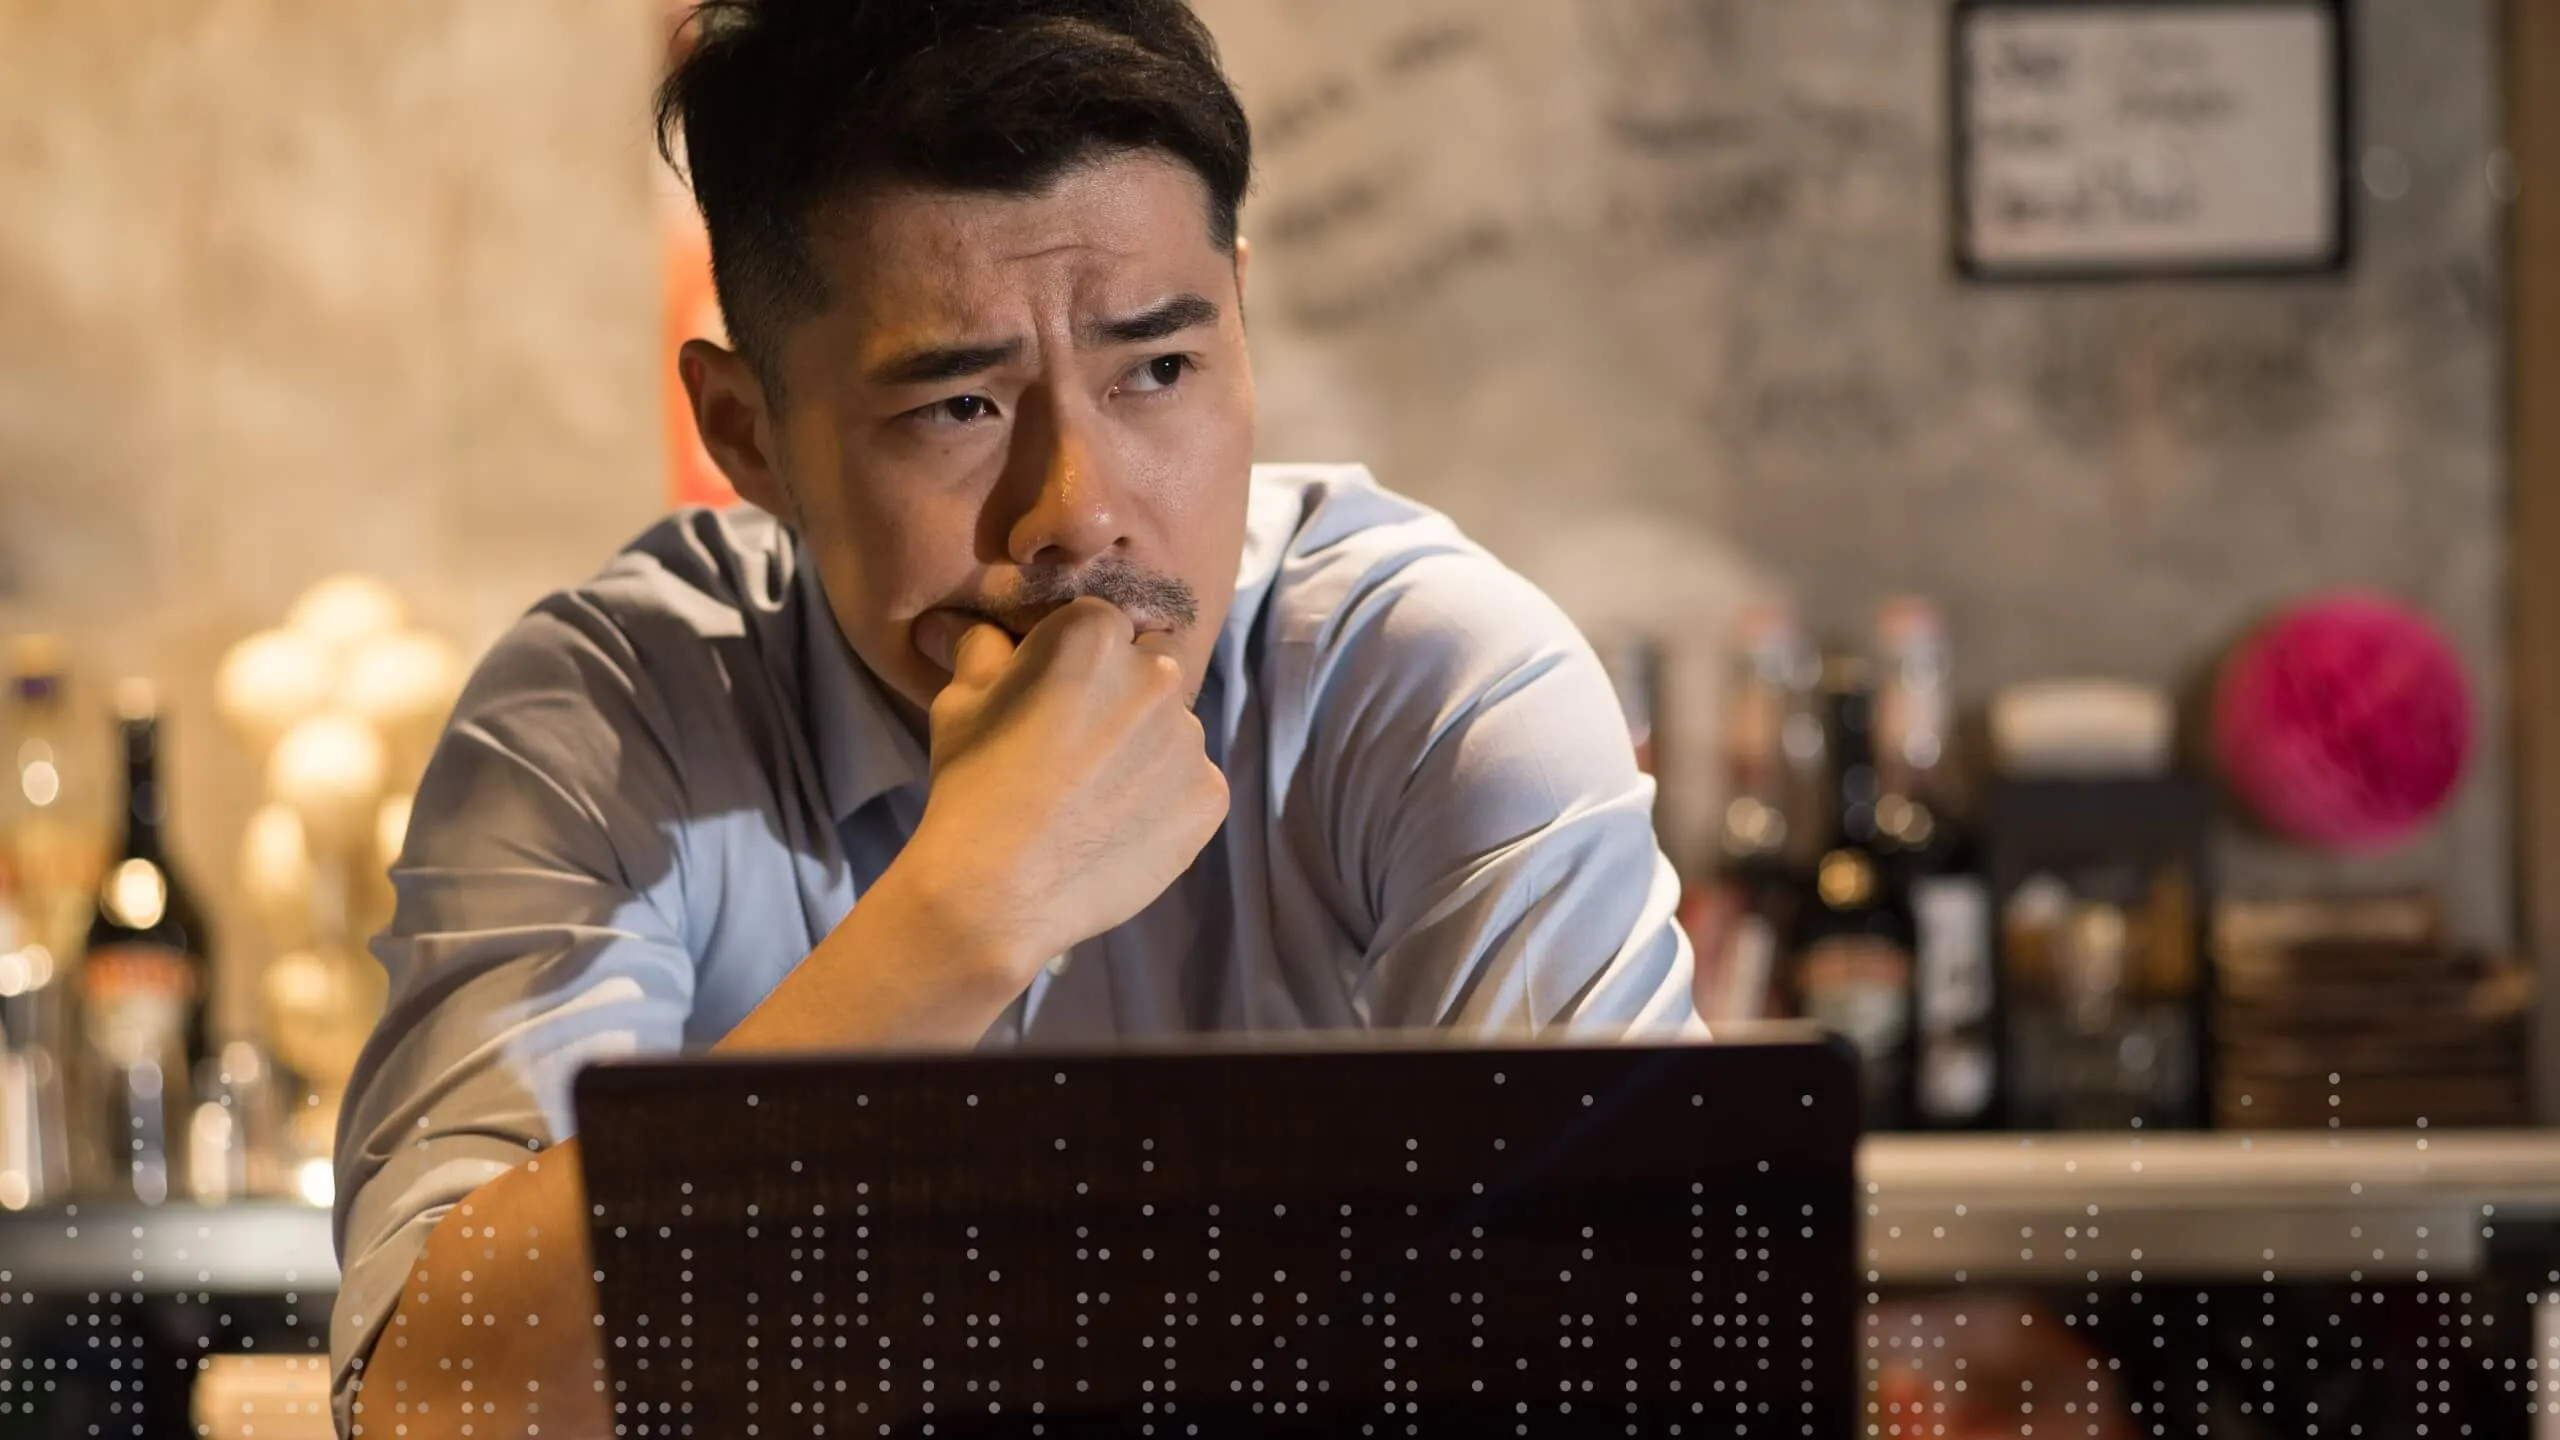 Thoughtful small business owner in front of laptop